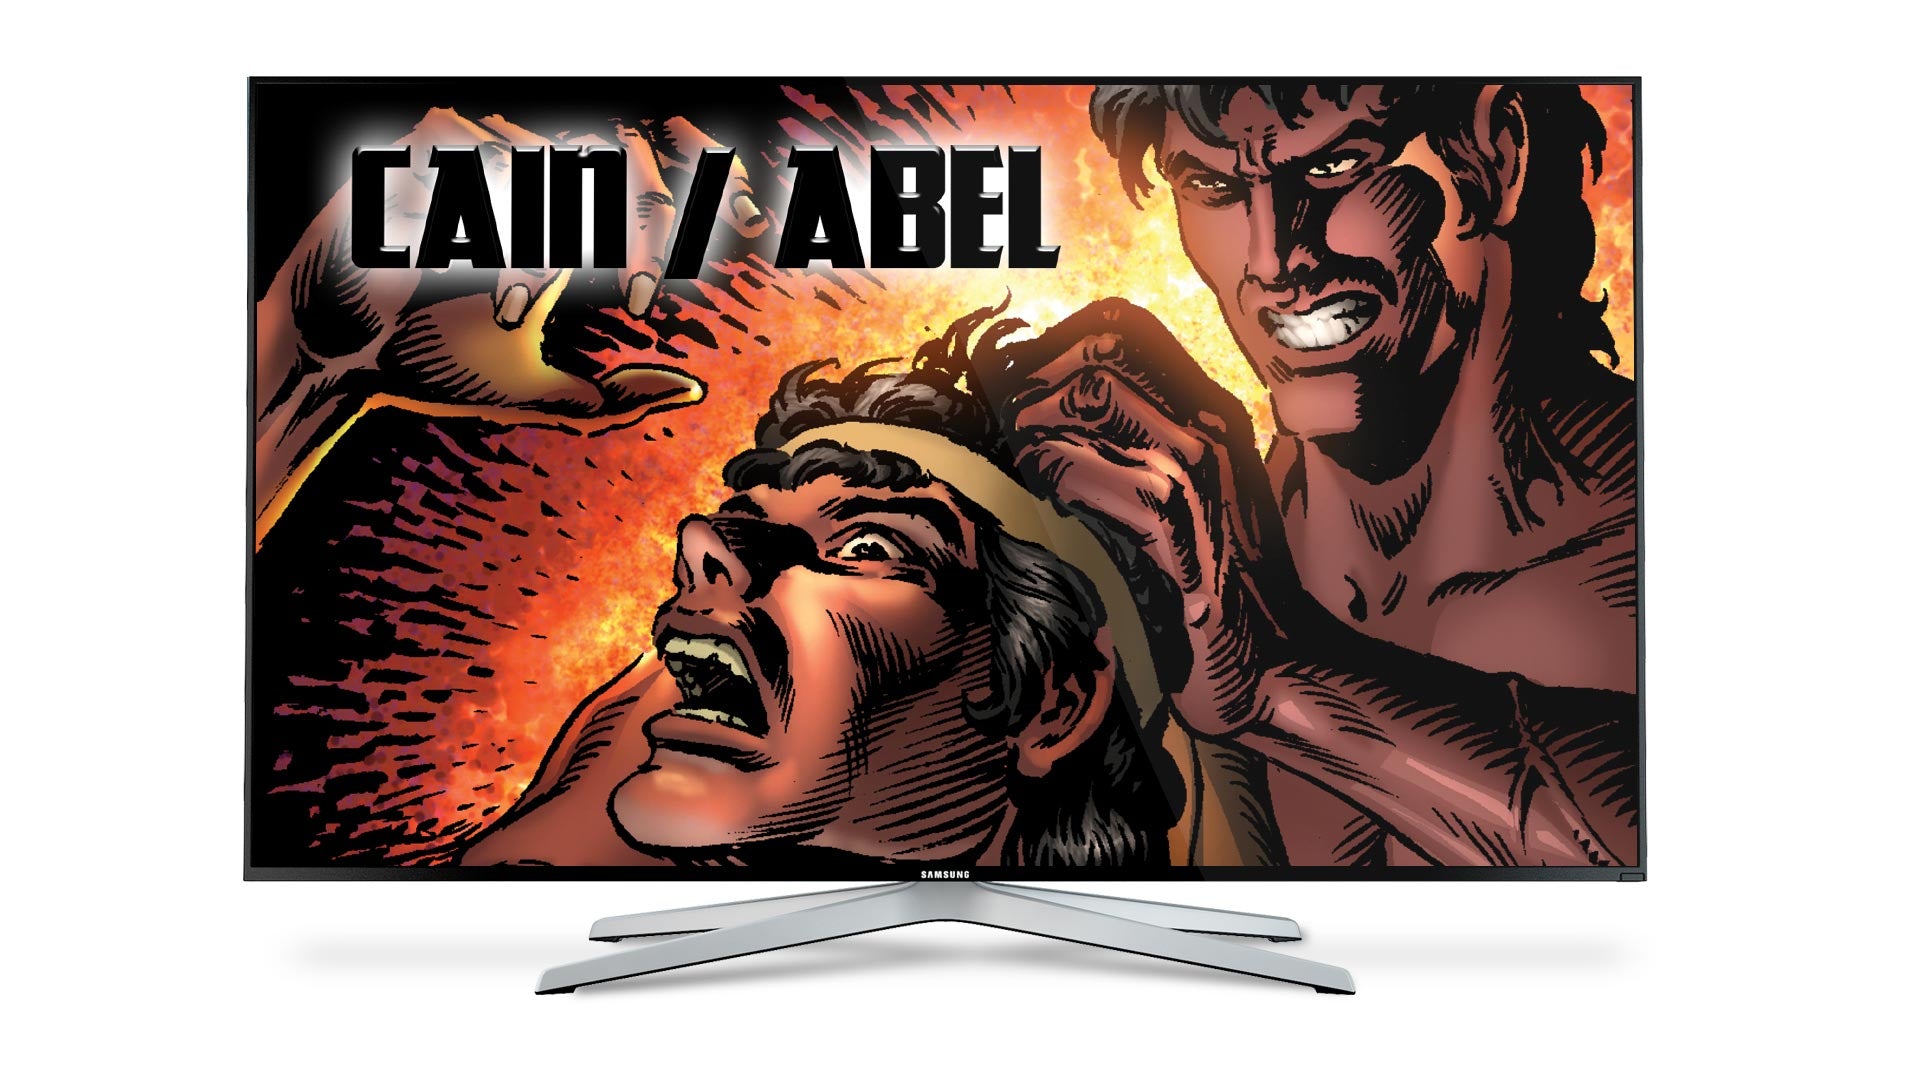 Motion Comic: Cain and Abel